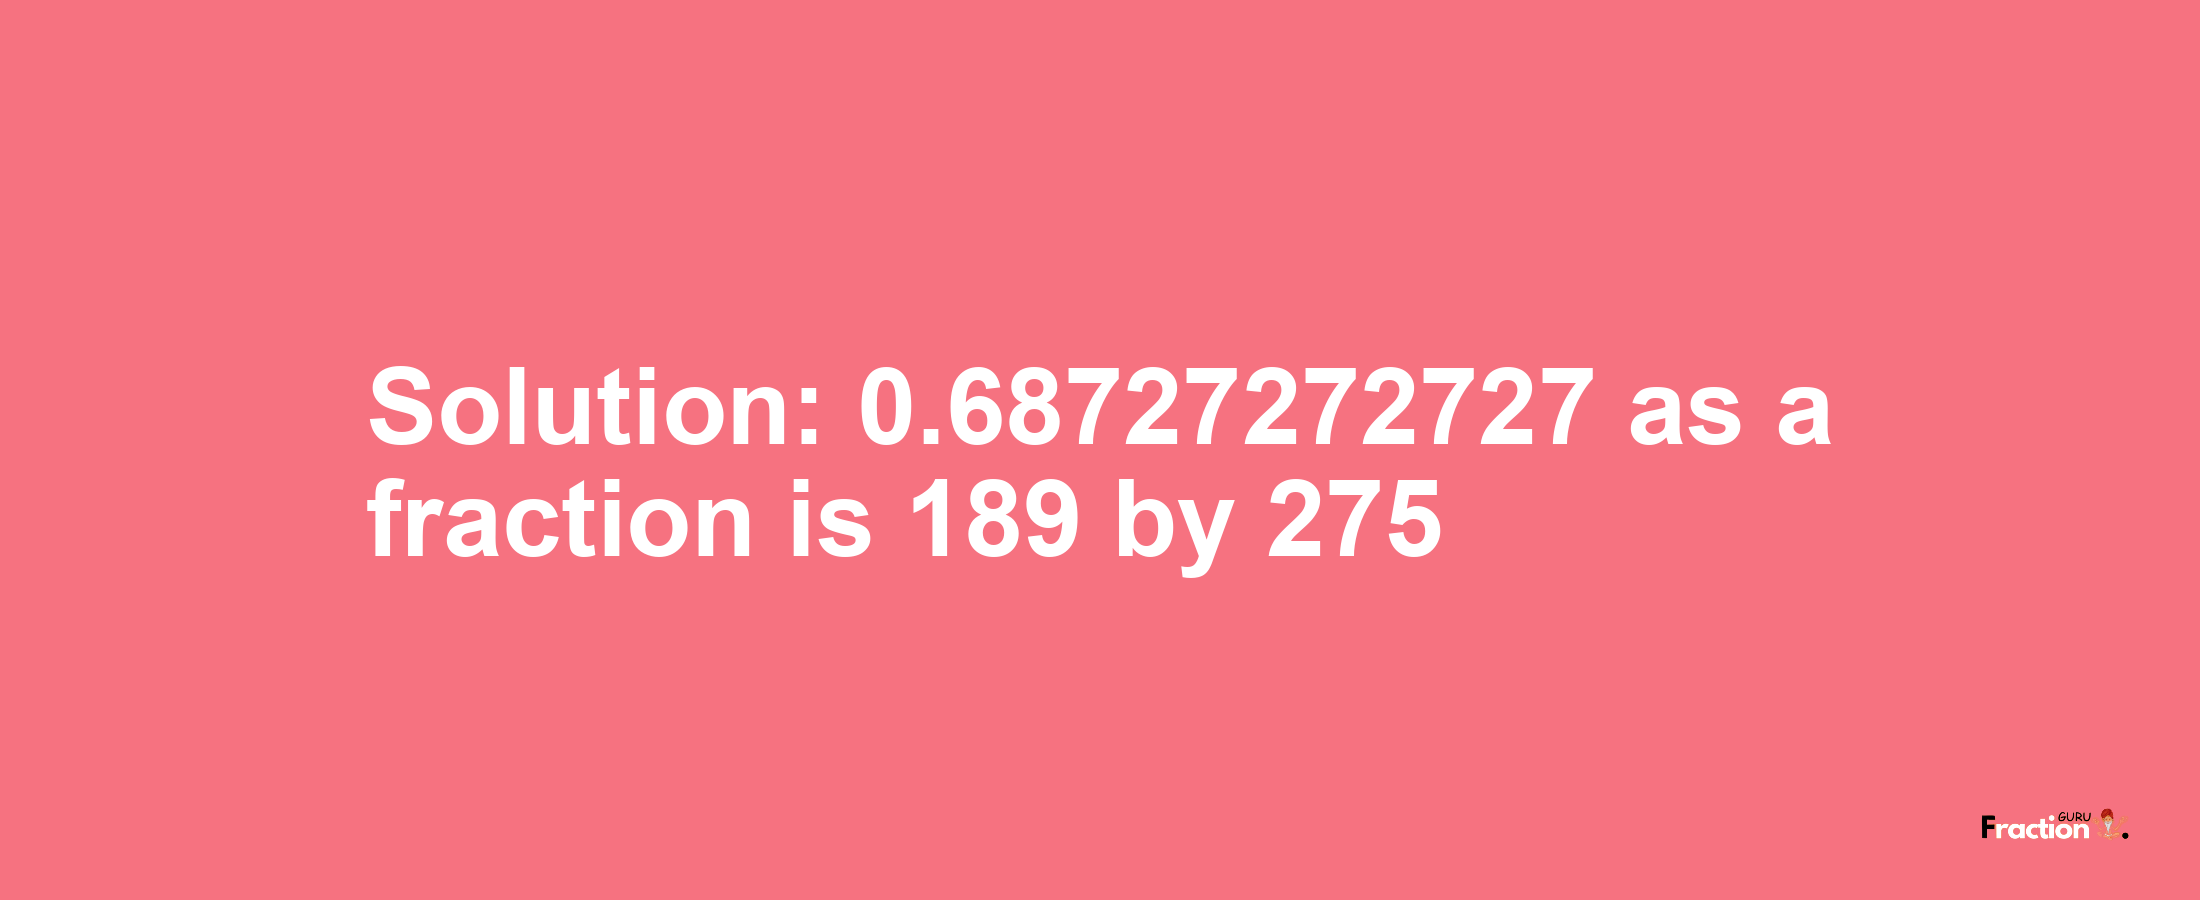 Solution:0.68727272727 as a fraction is 189/275